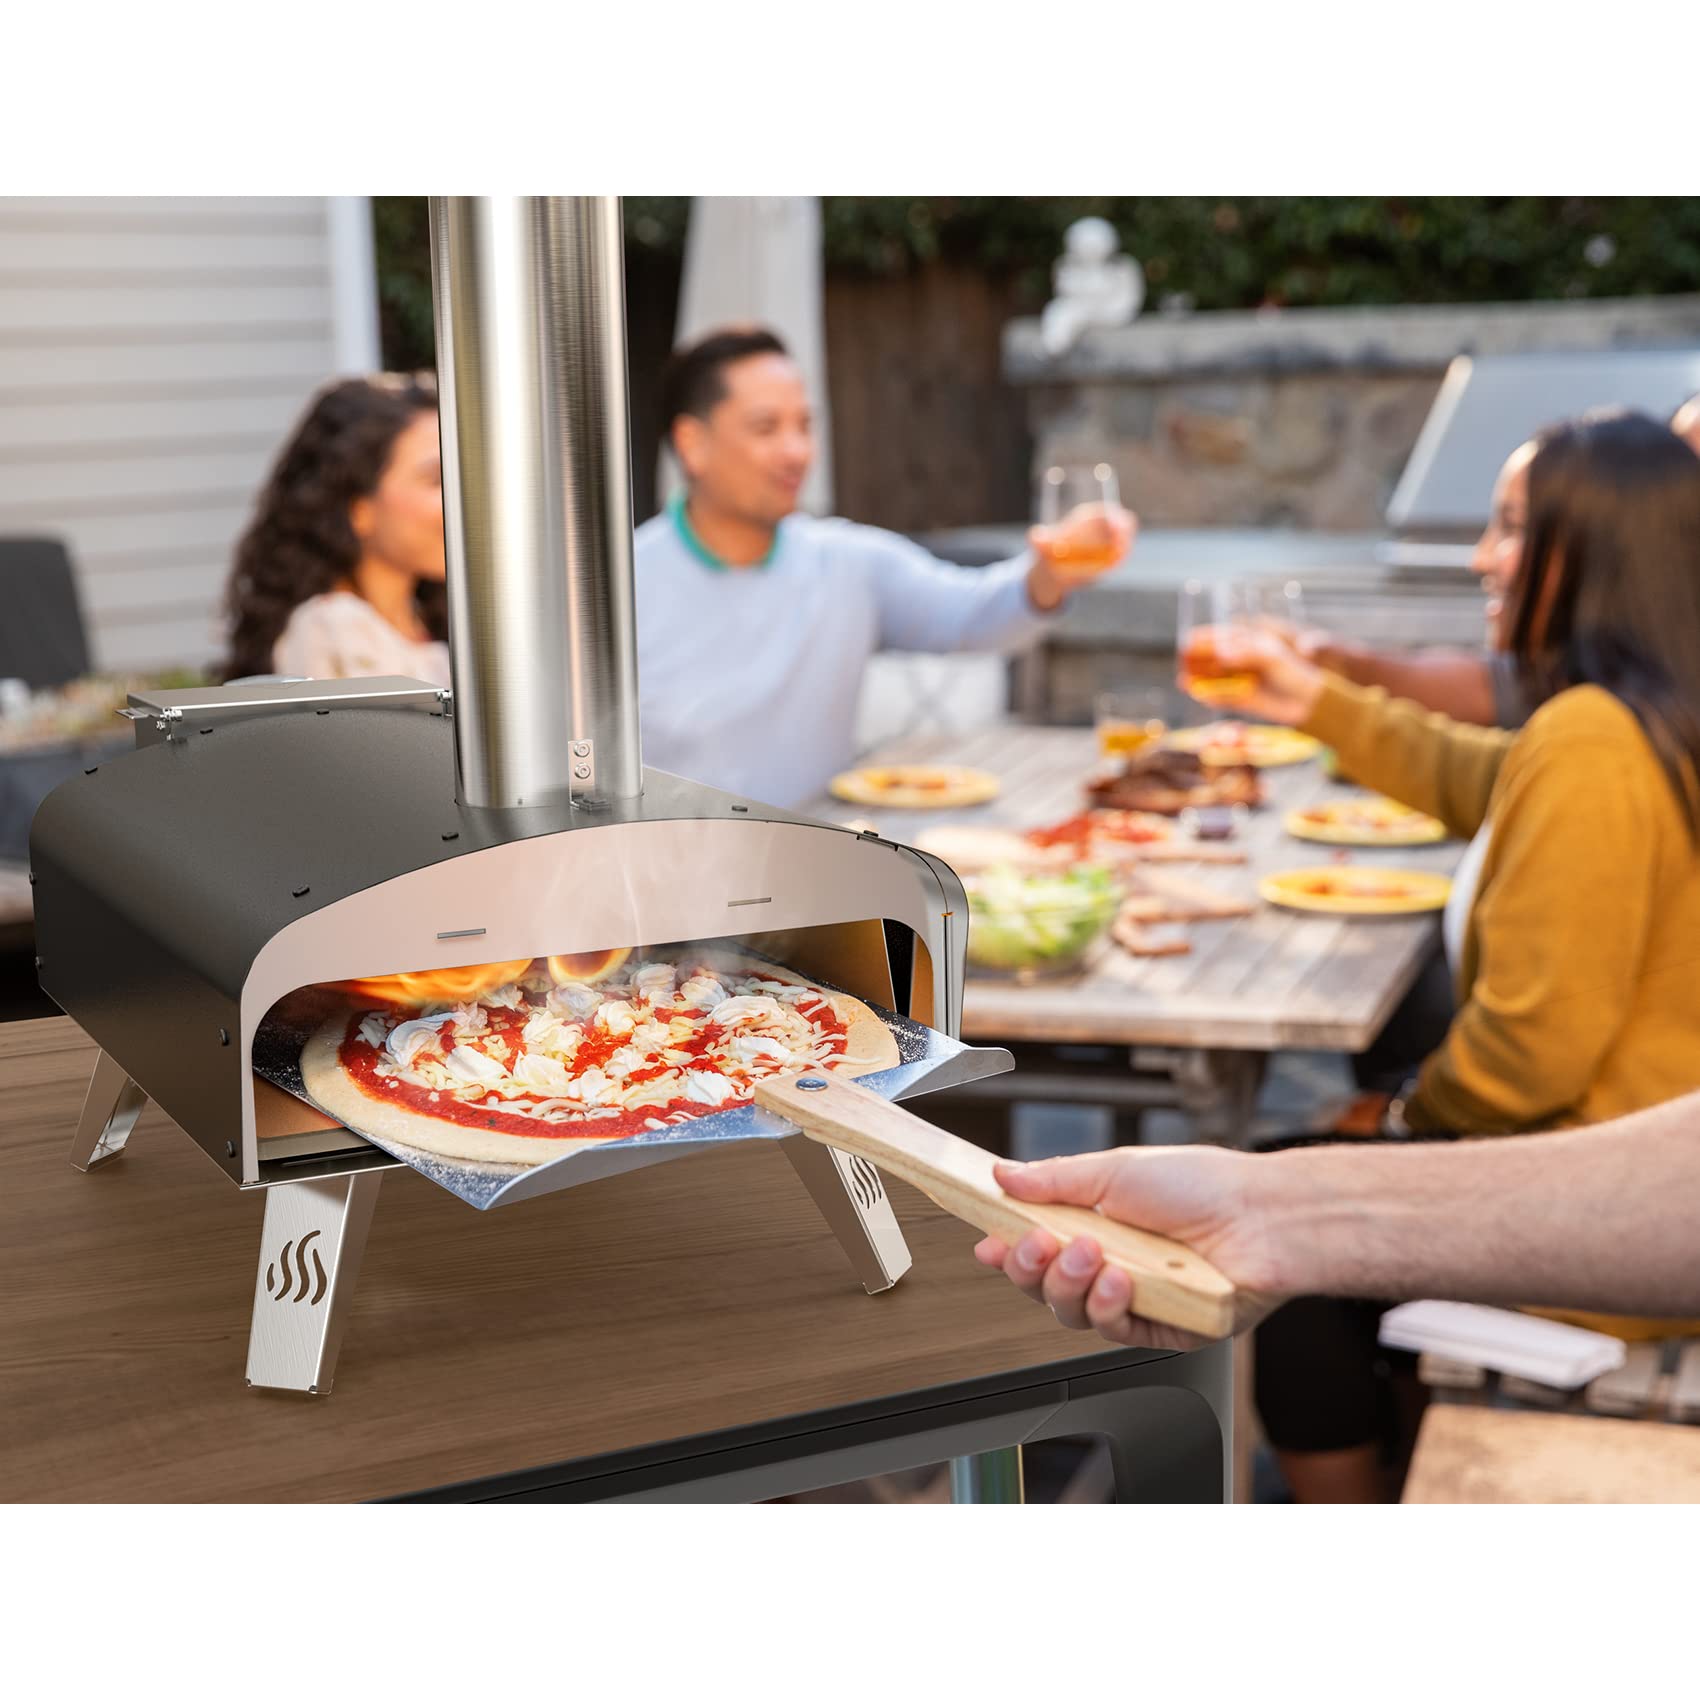 Mimiuo Portable Wood Pellet Pizza Oven with 13